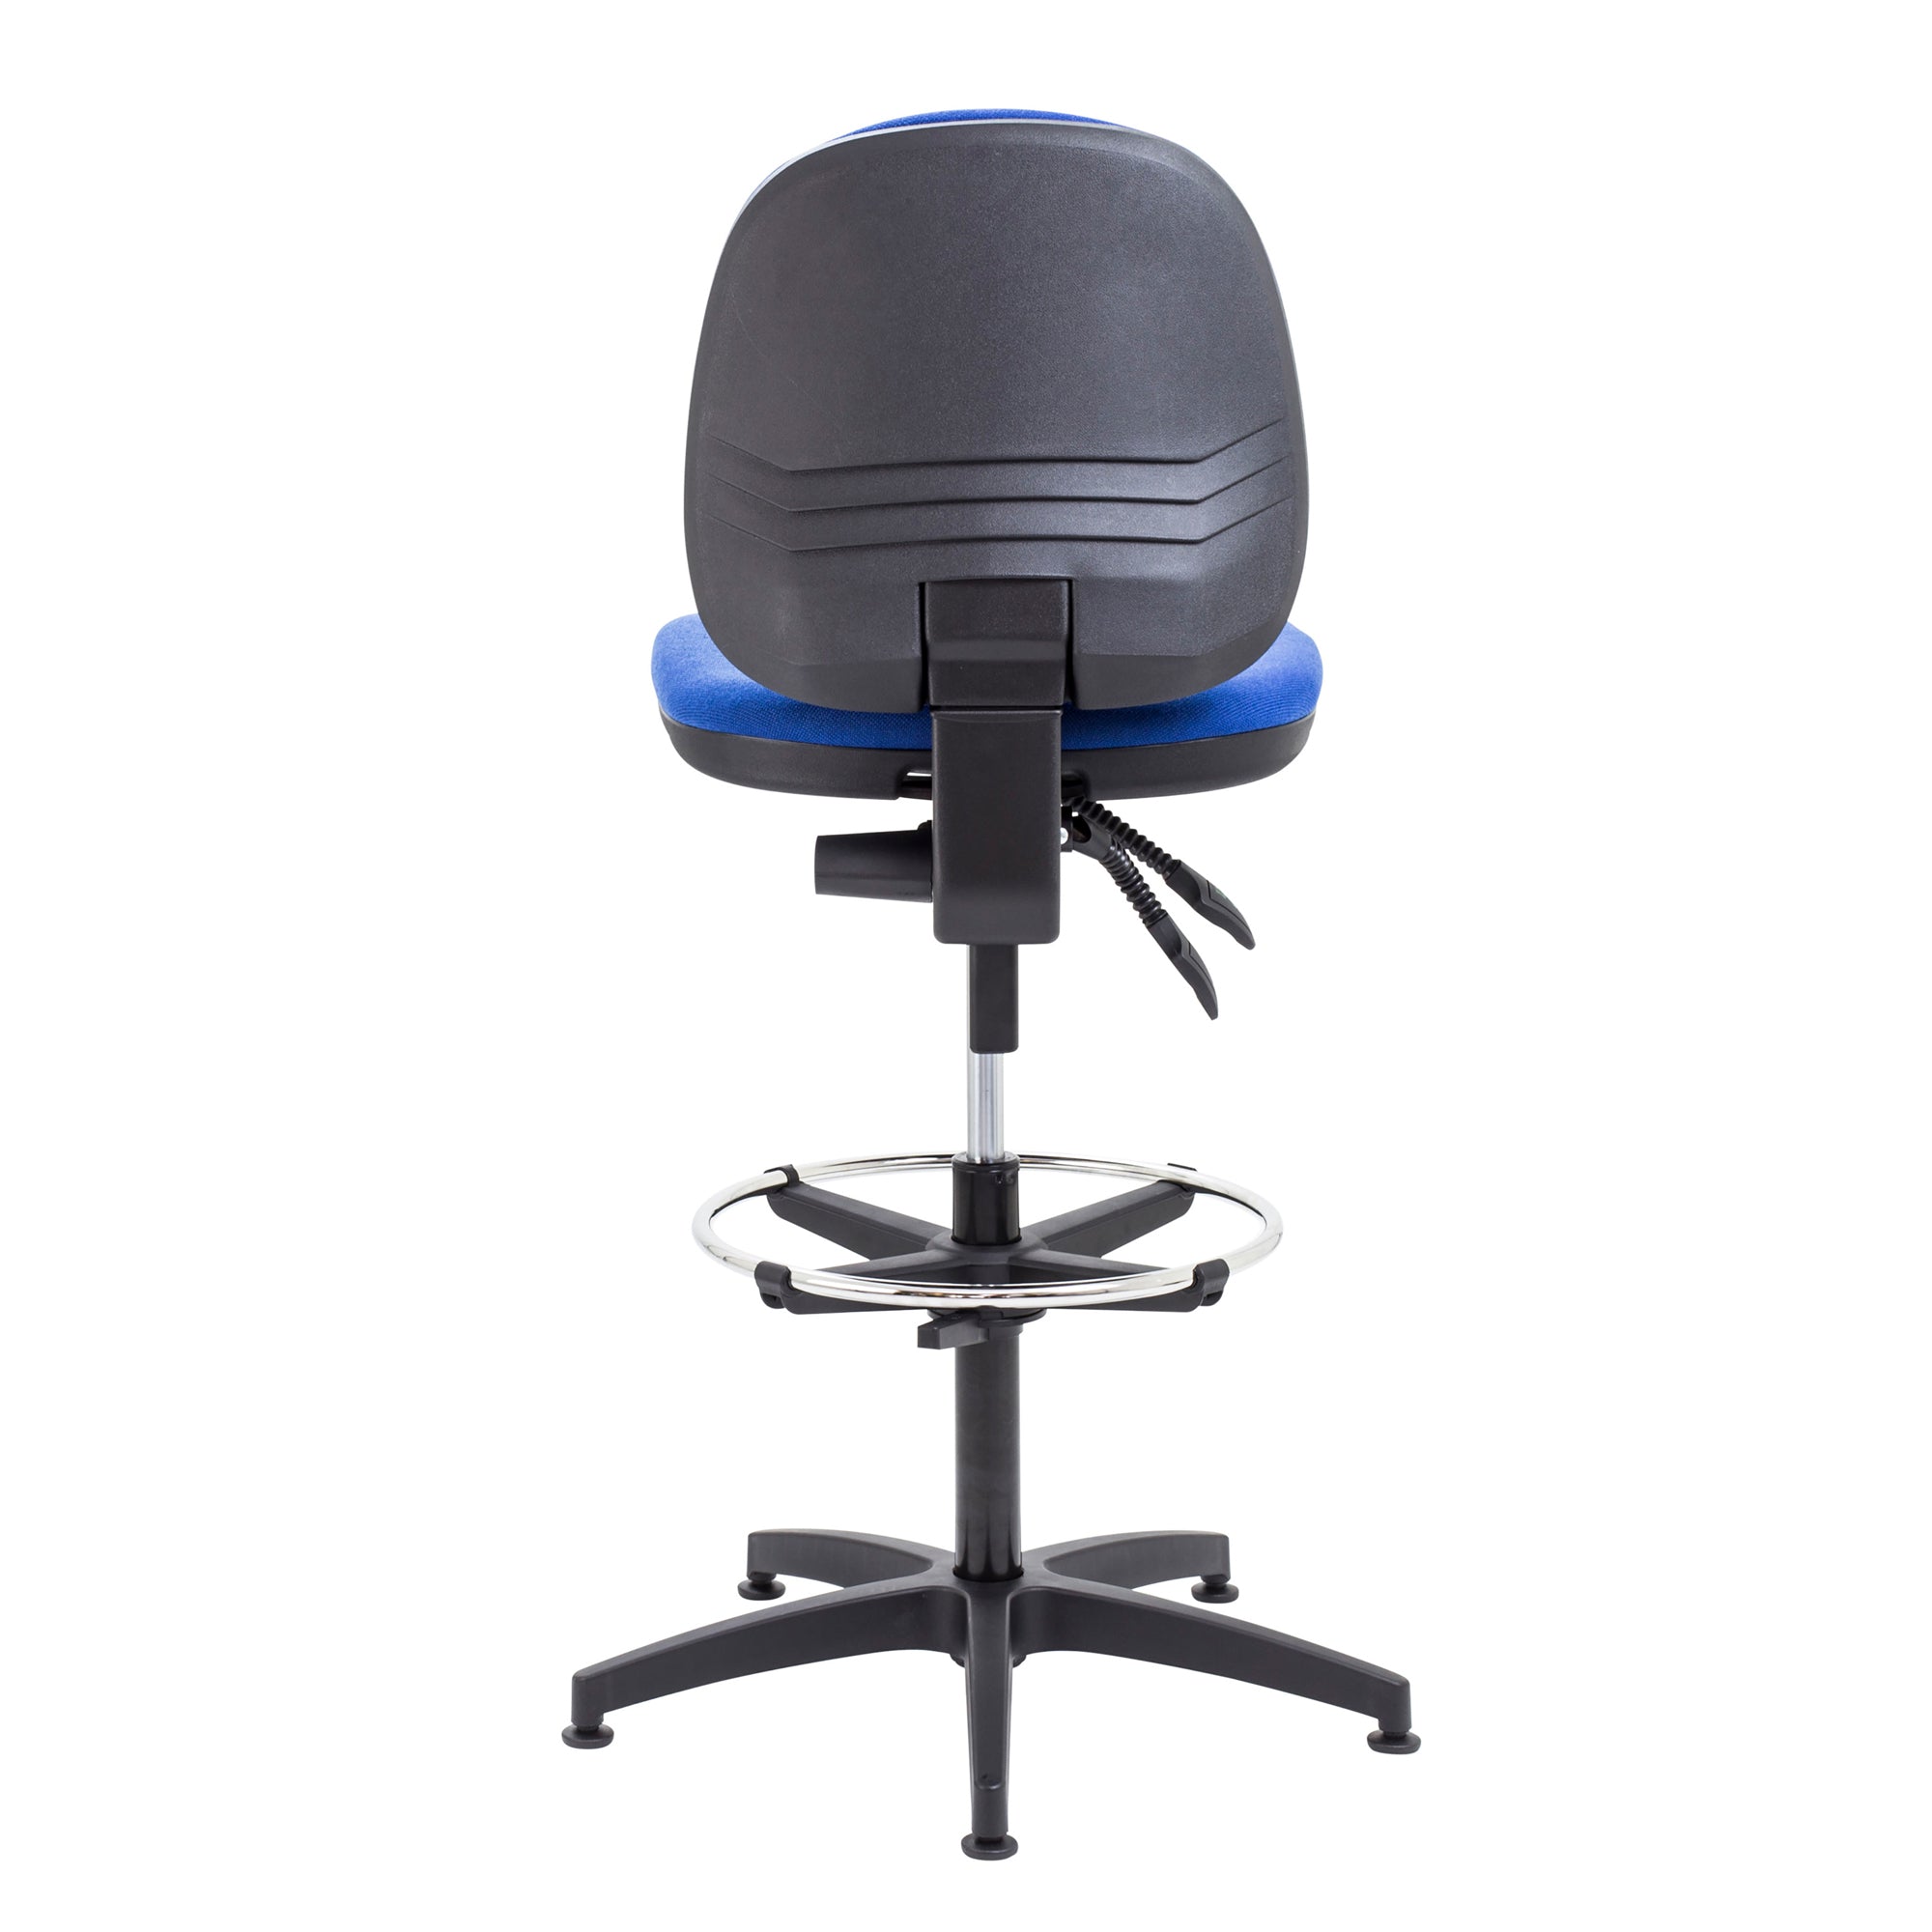 Concept Mid Back Chair with Draughtsman Kit